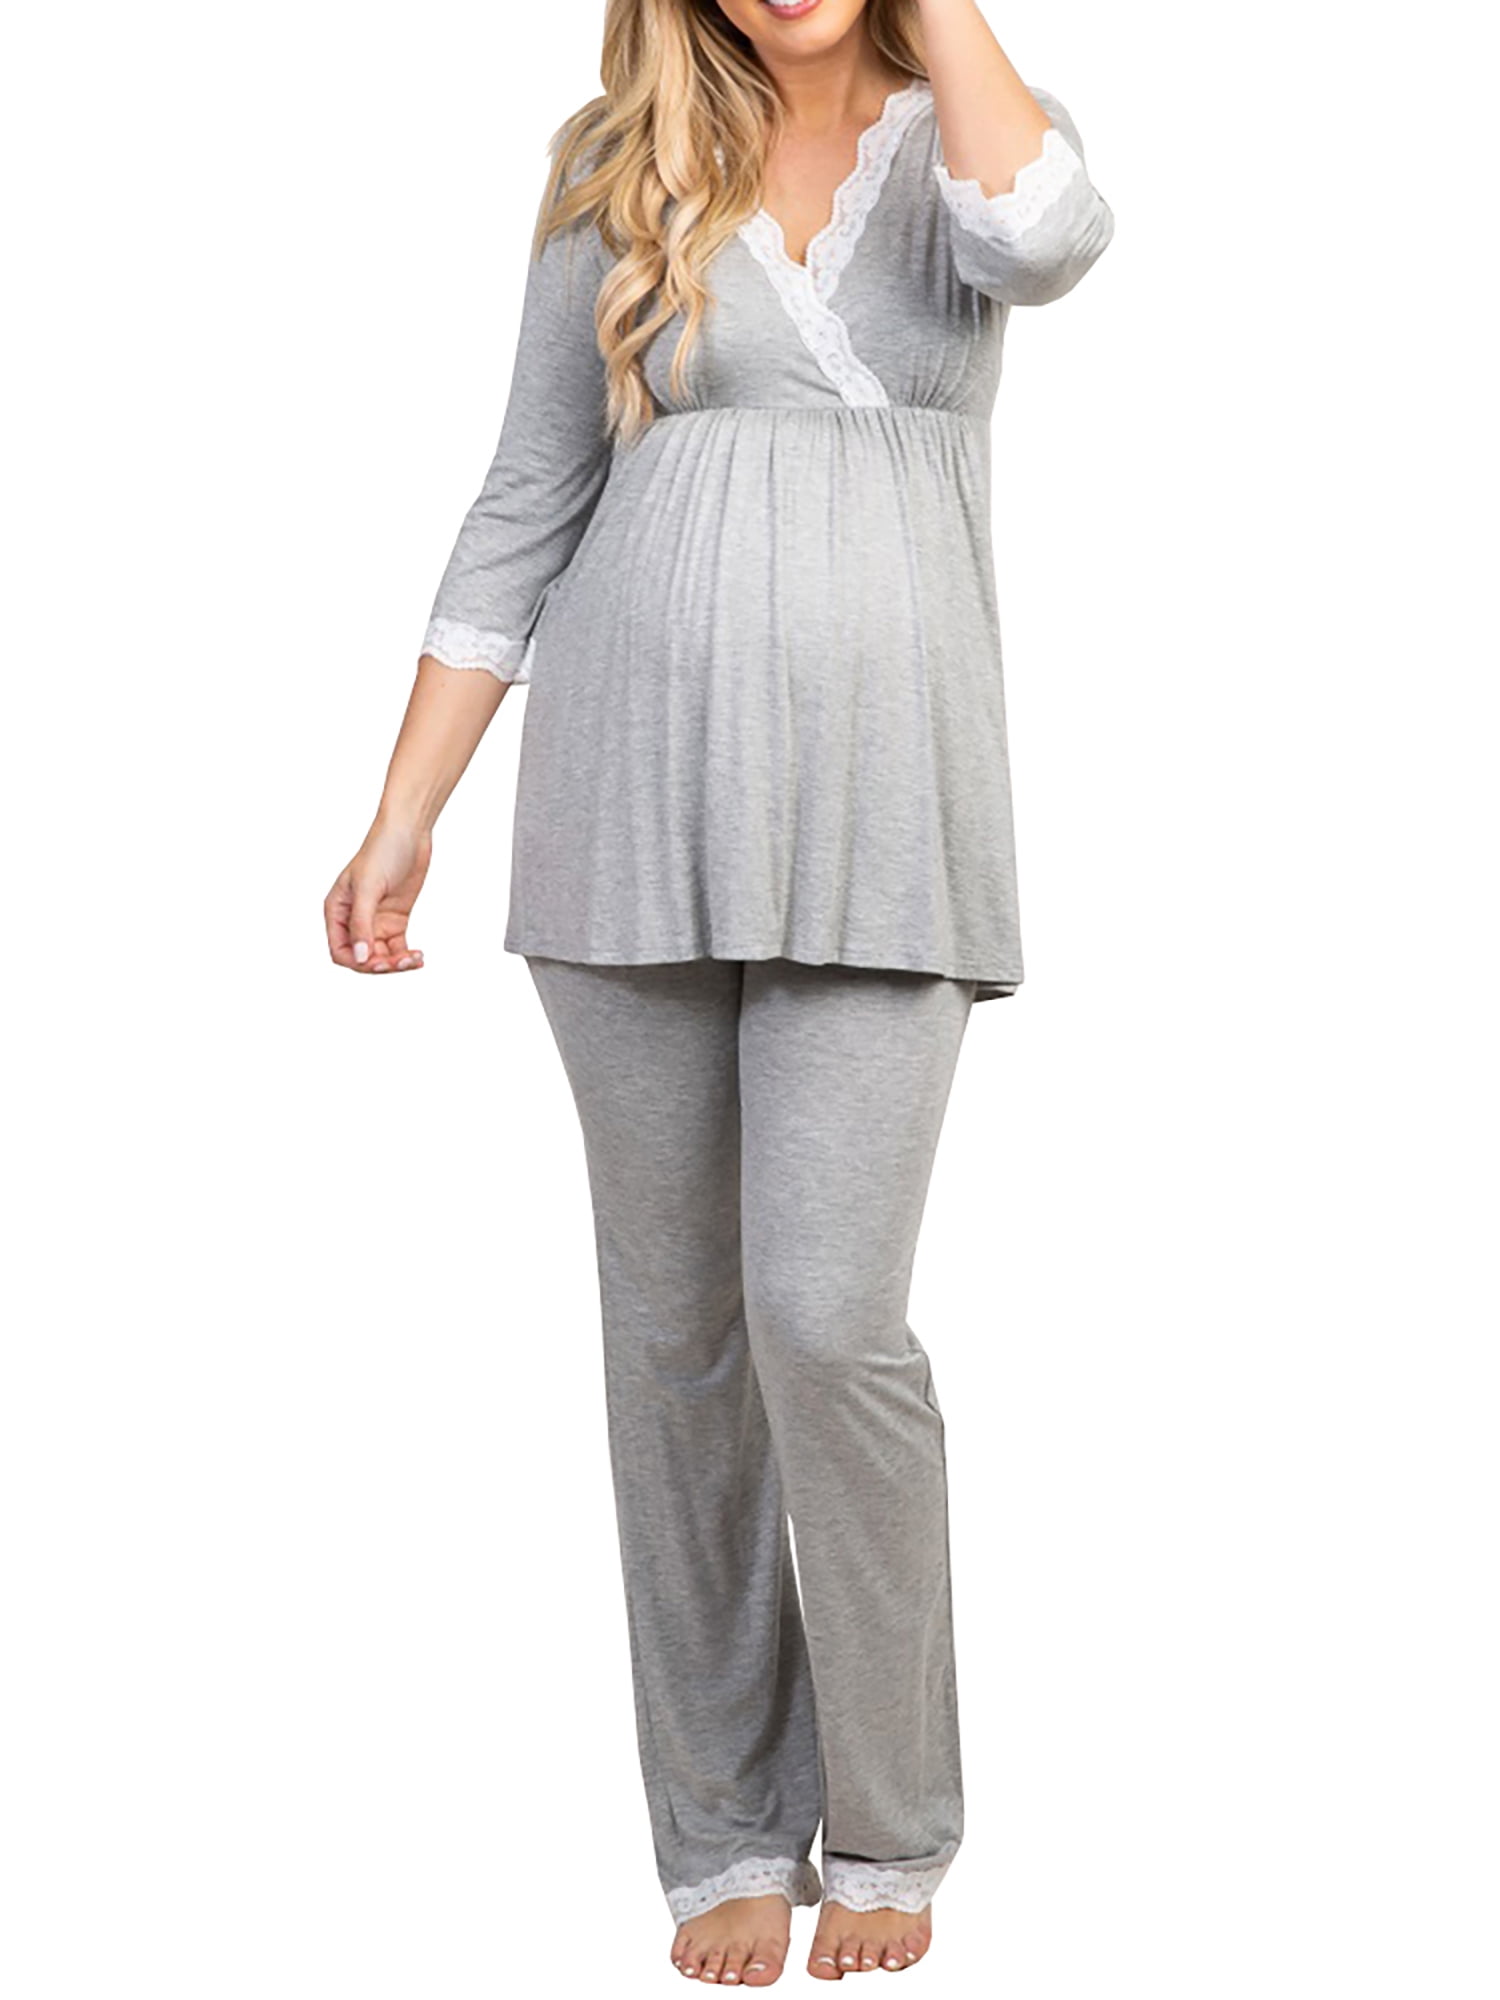 Womens Cotton Maternity Pregnancy Soft Nursing Pajama Sets Sleepwear Long  Sleeves for delivery Breastfeeding in Hospital 